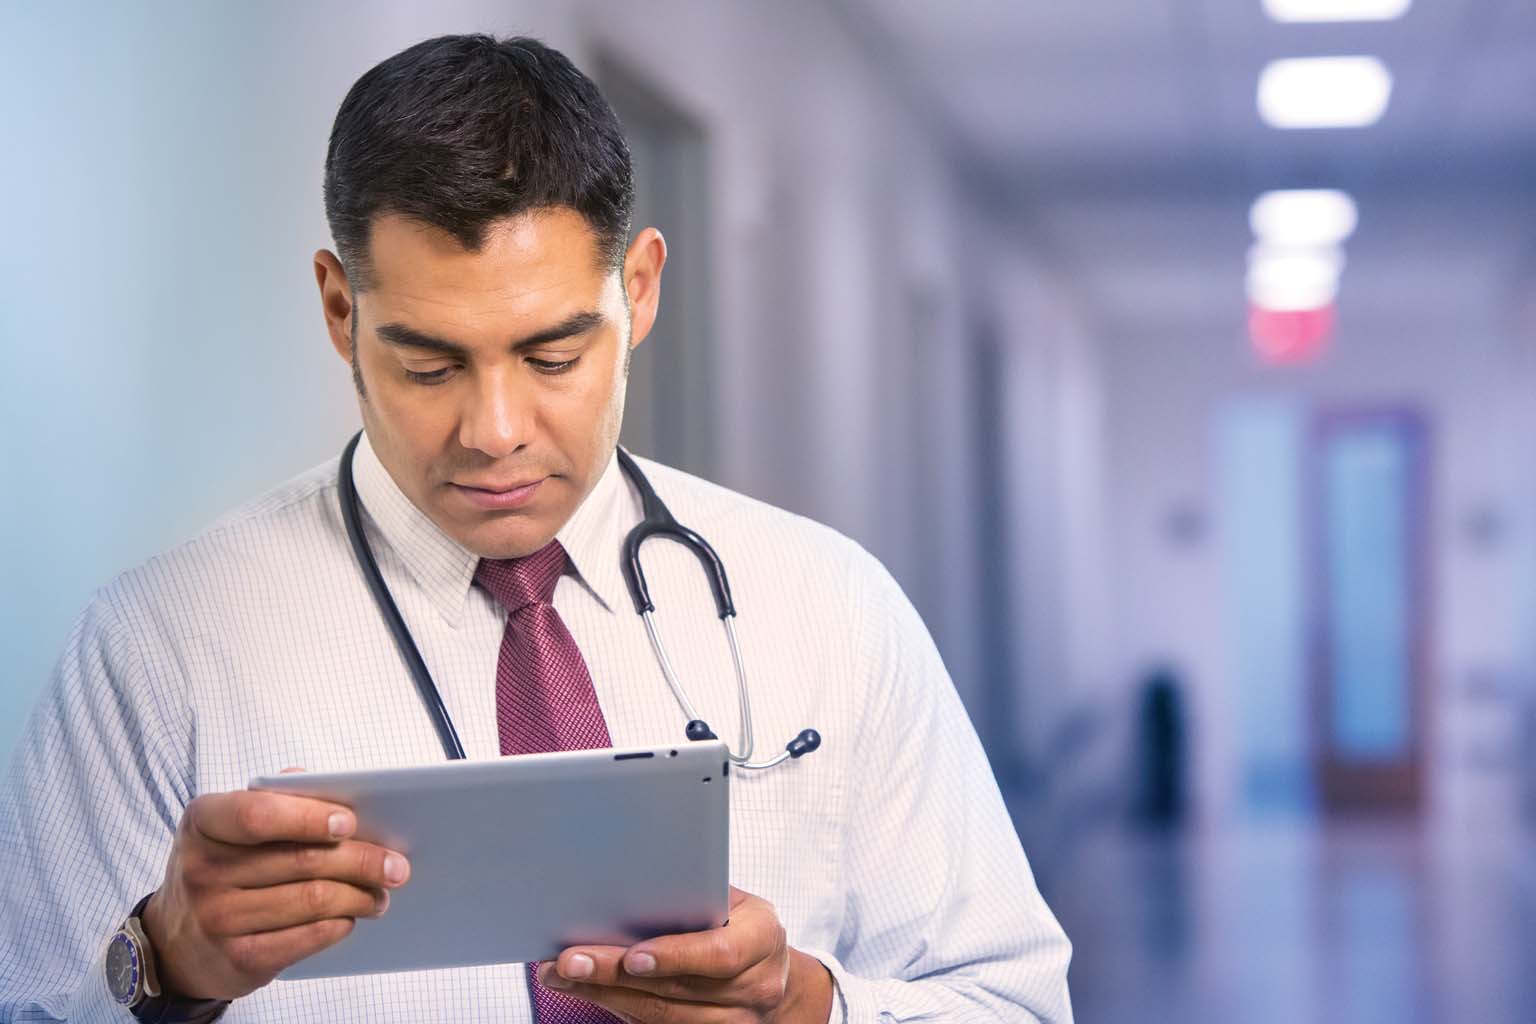 Three ways technology can improve clinical documentation accuracy and efficiency